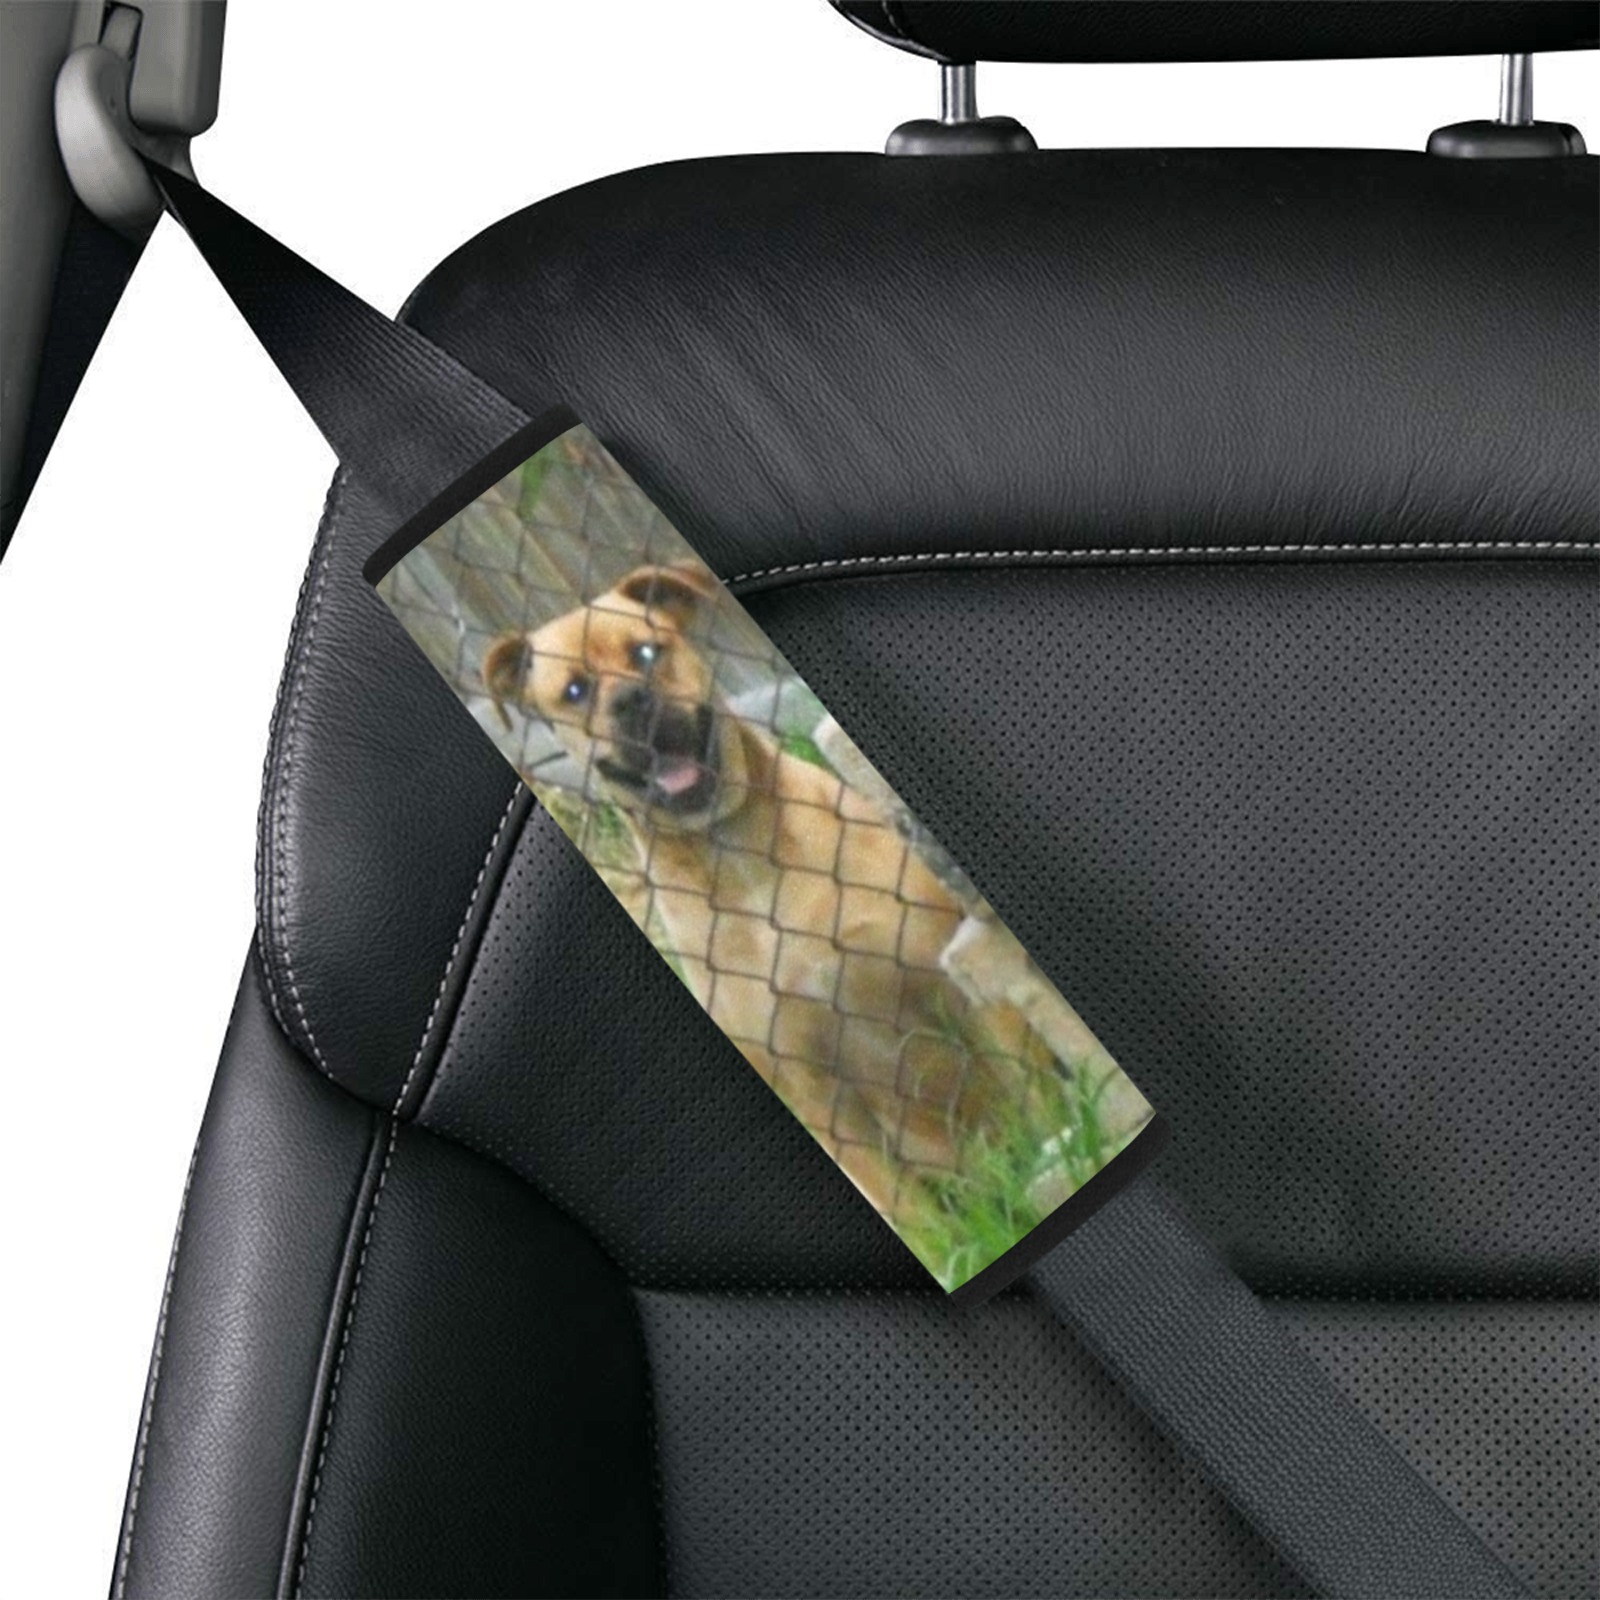 A Smiling Dog Car Seat Belt Cover 7''x8.5'' (Pack of 2)